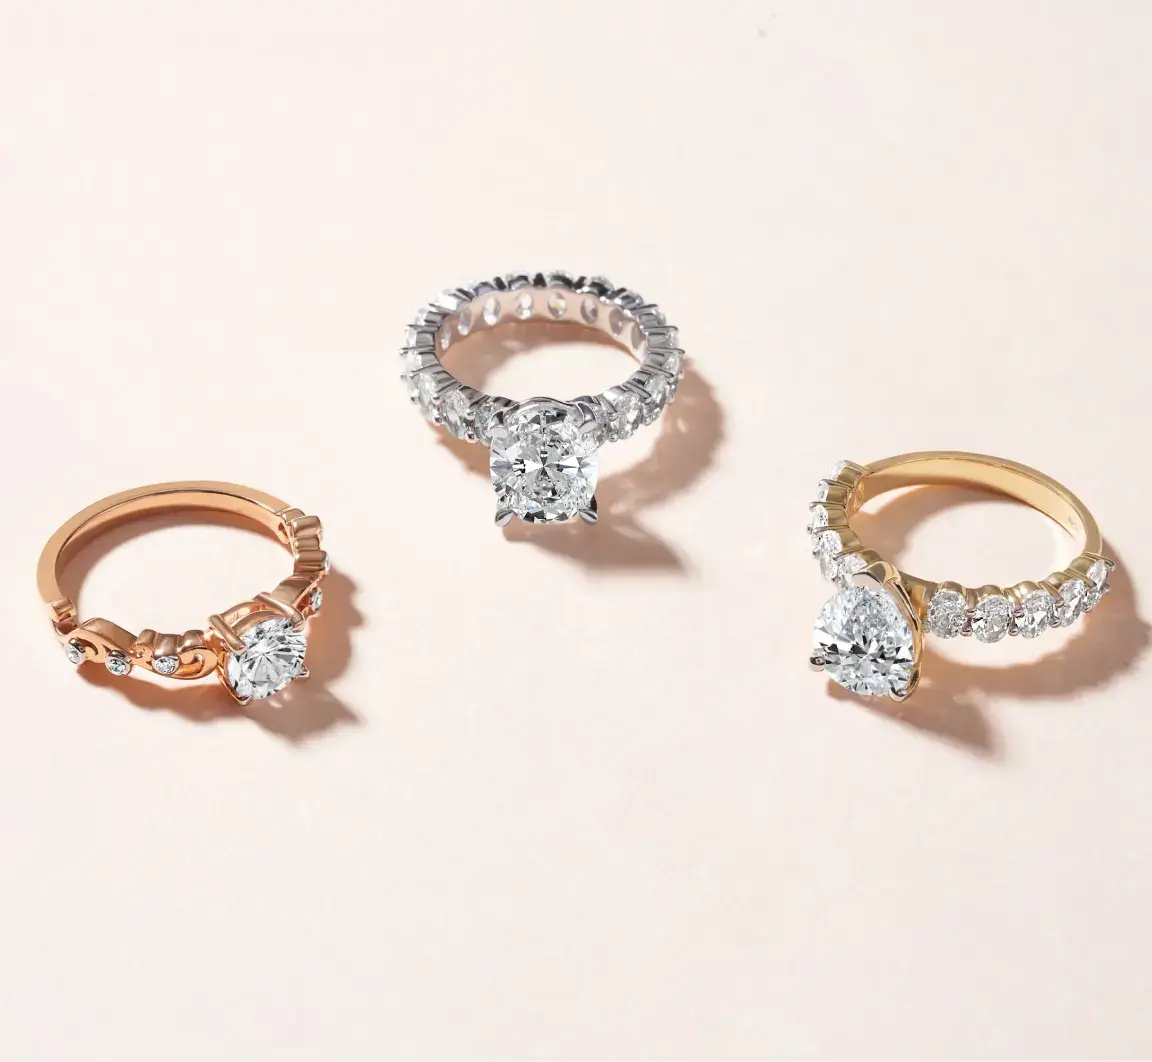 Ethical Engagement Rings: What to Look For & Why it Matters